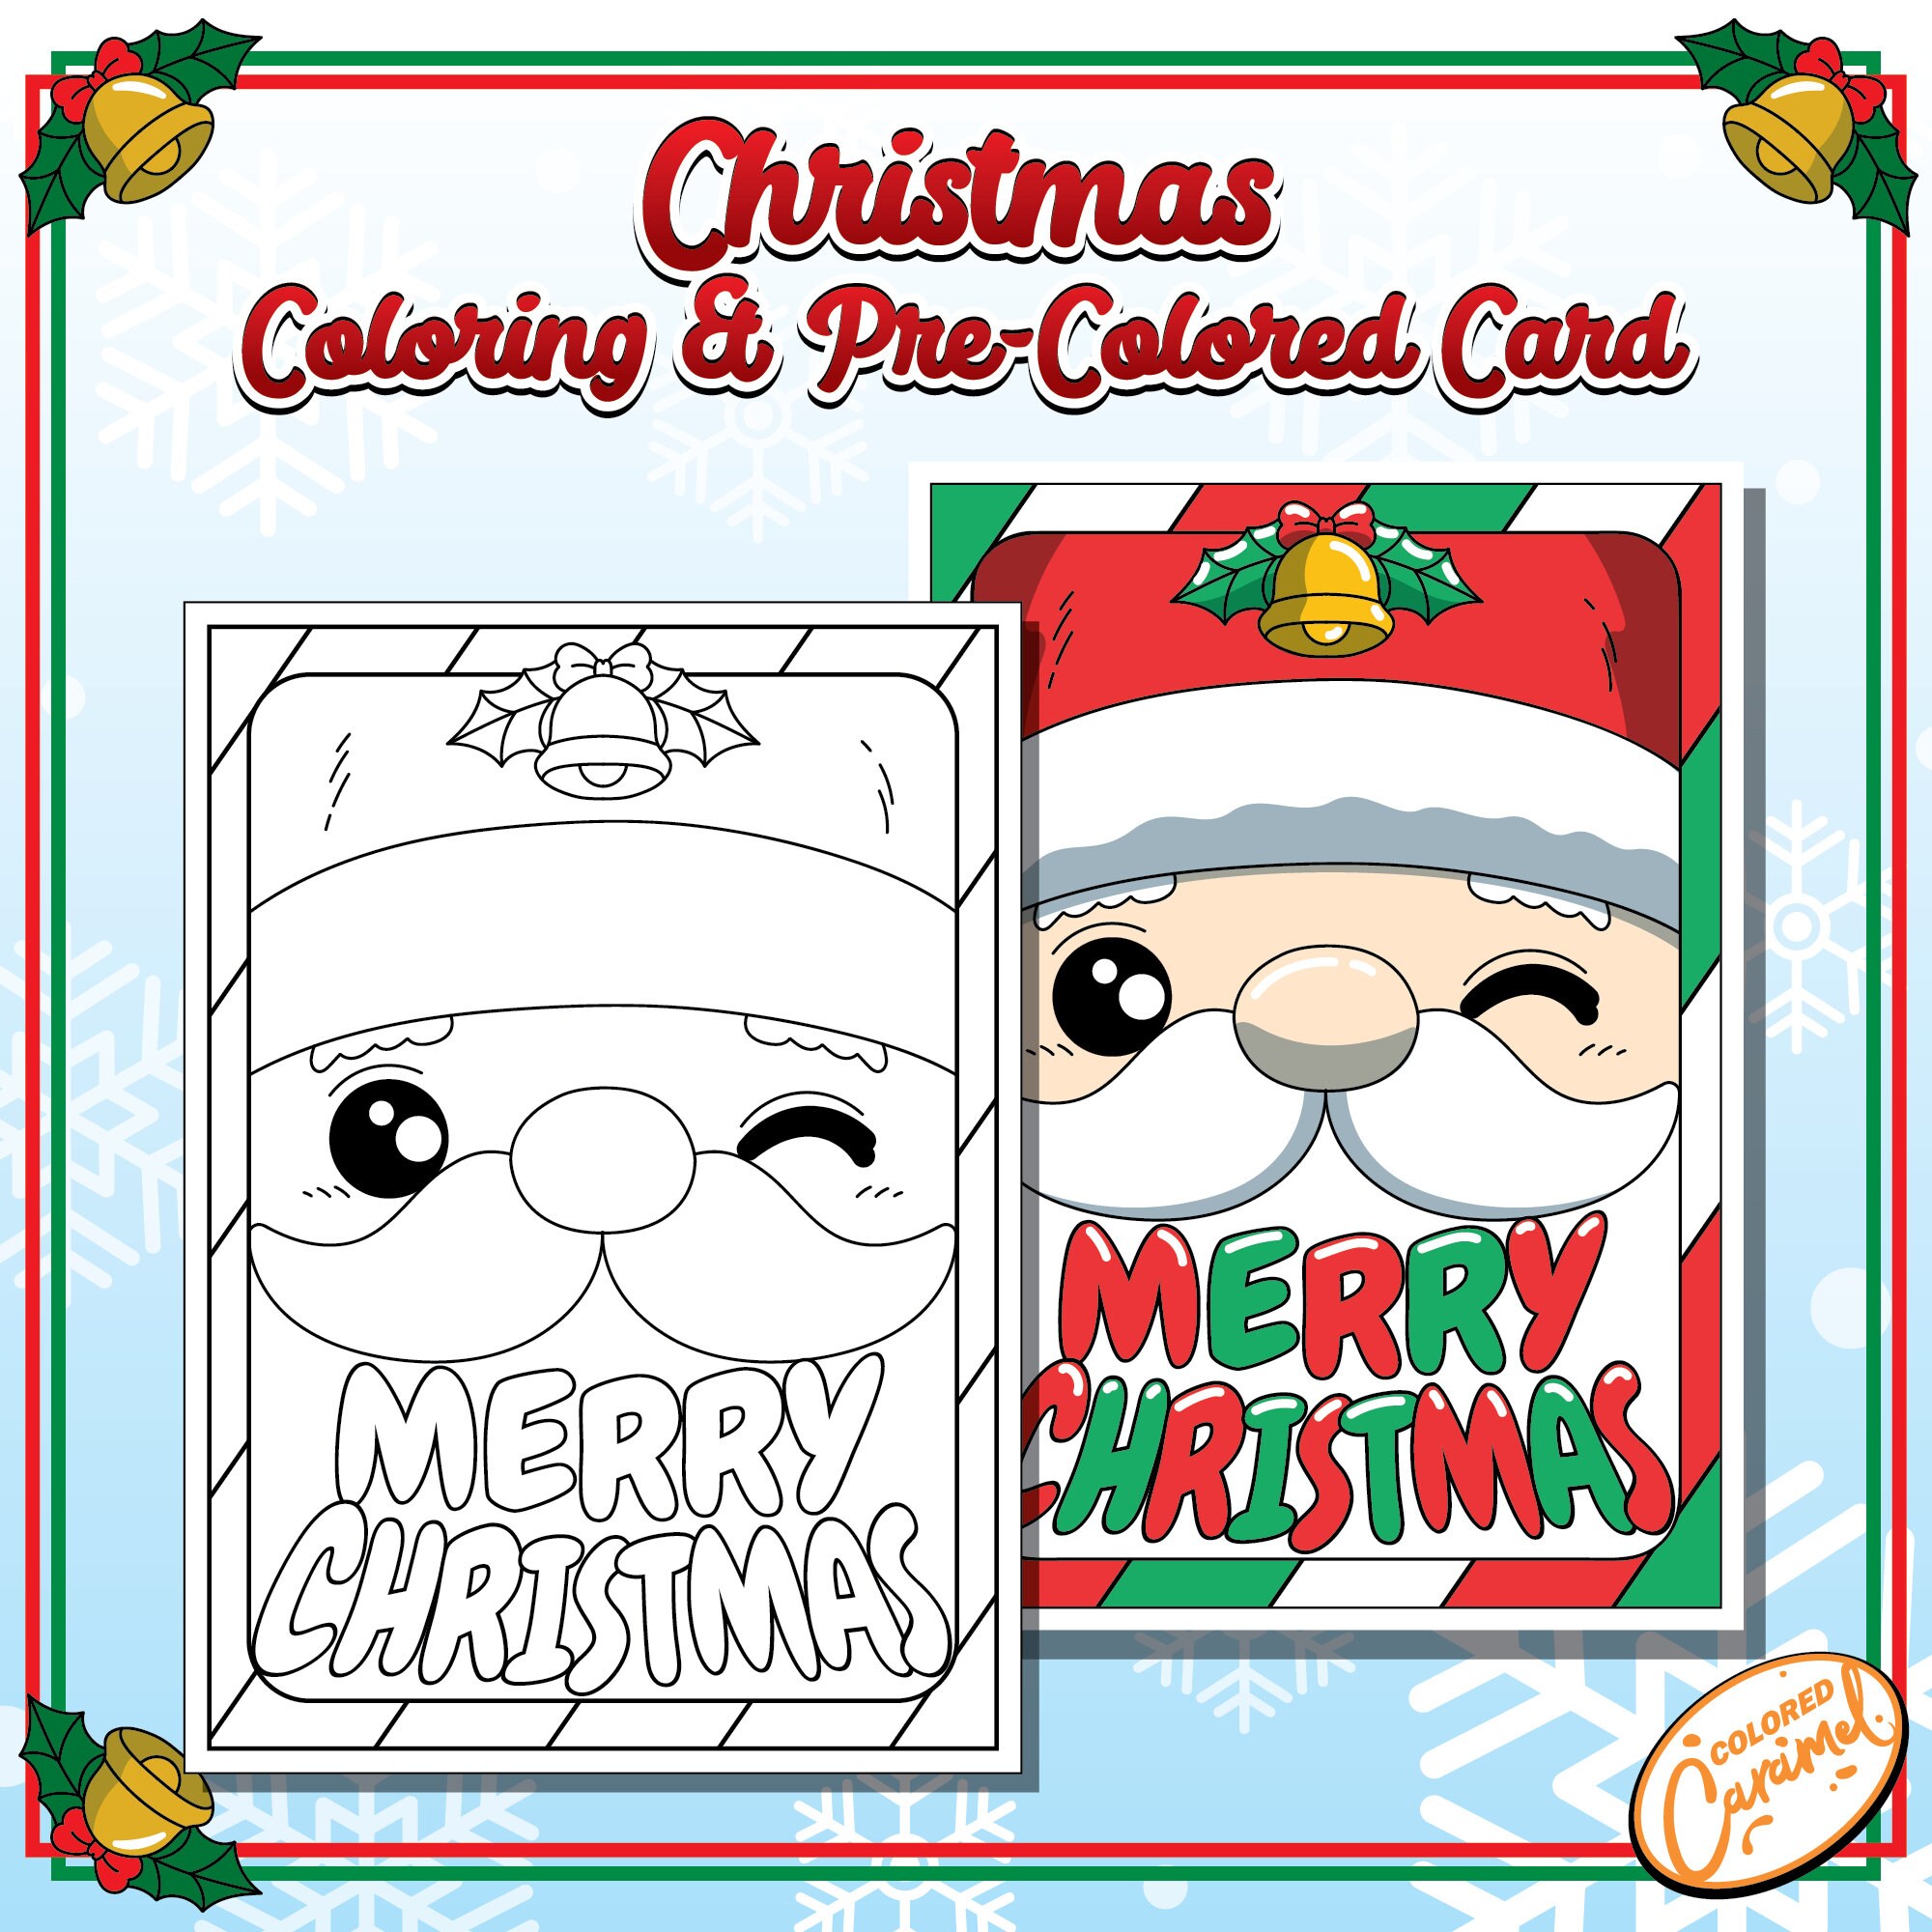 Merry Christmas Santa Coloring Card for Kids, Colorable and Pre-colored Holiday Greeting Card,DIY Festive Printable Instant Digital Download